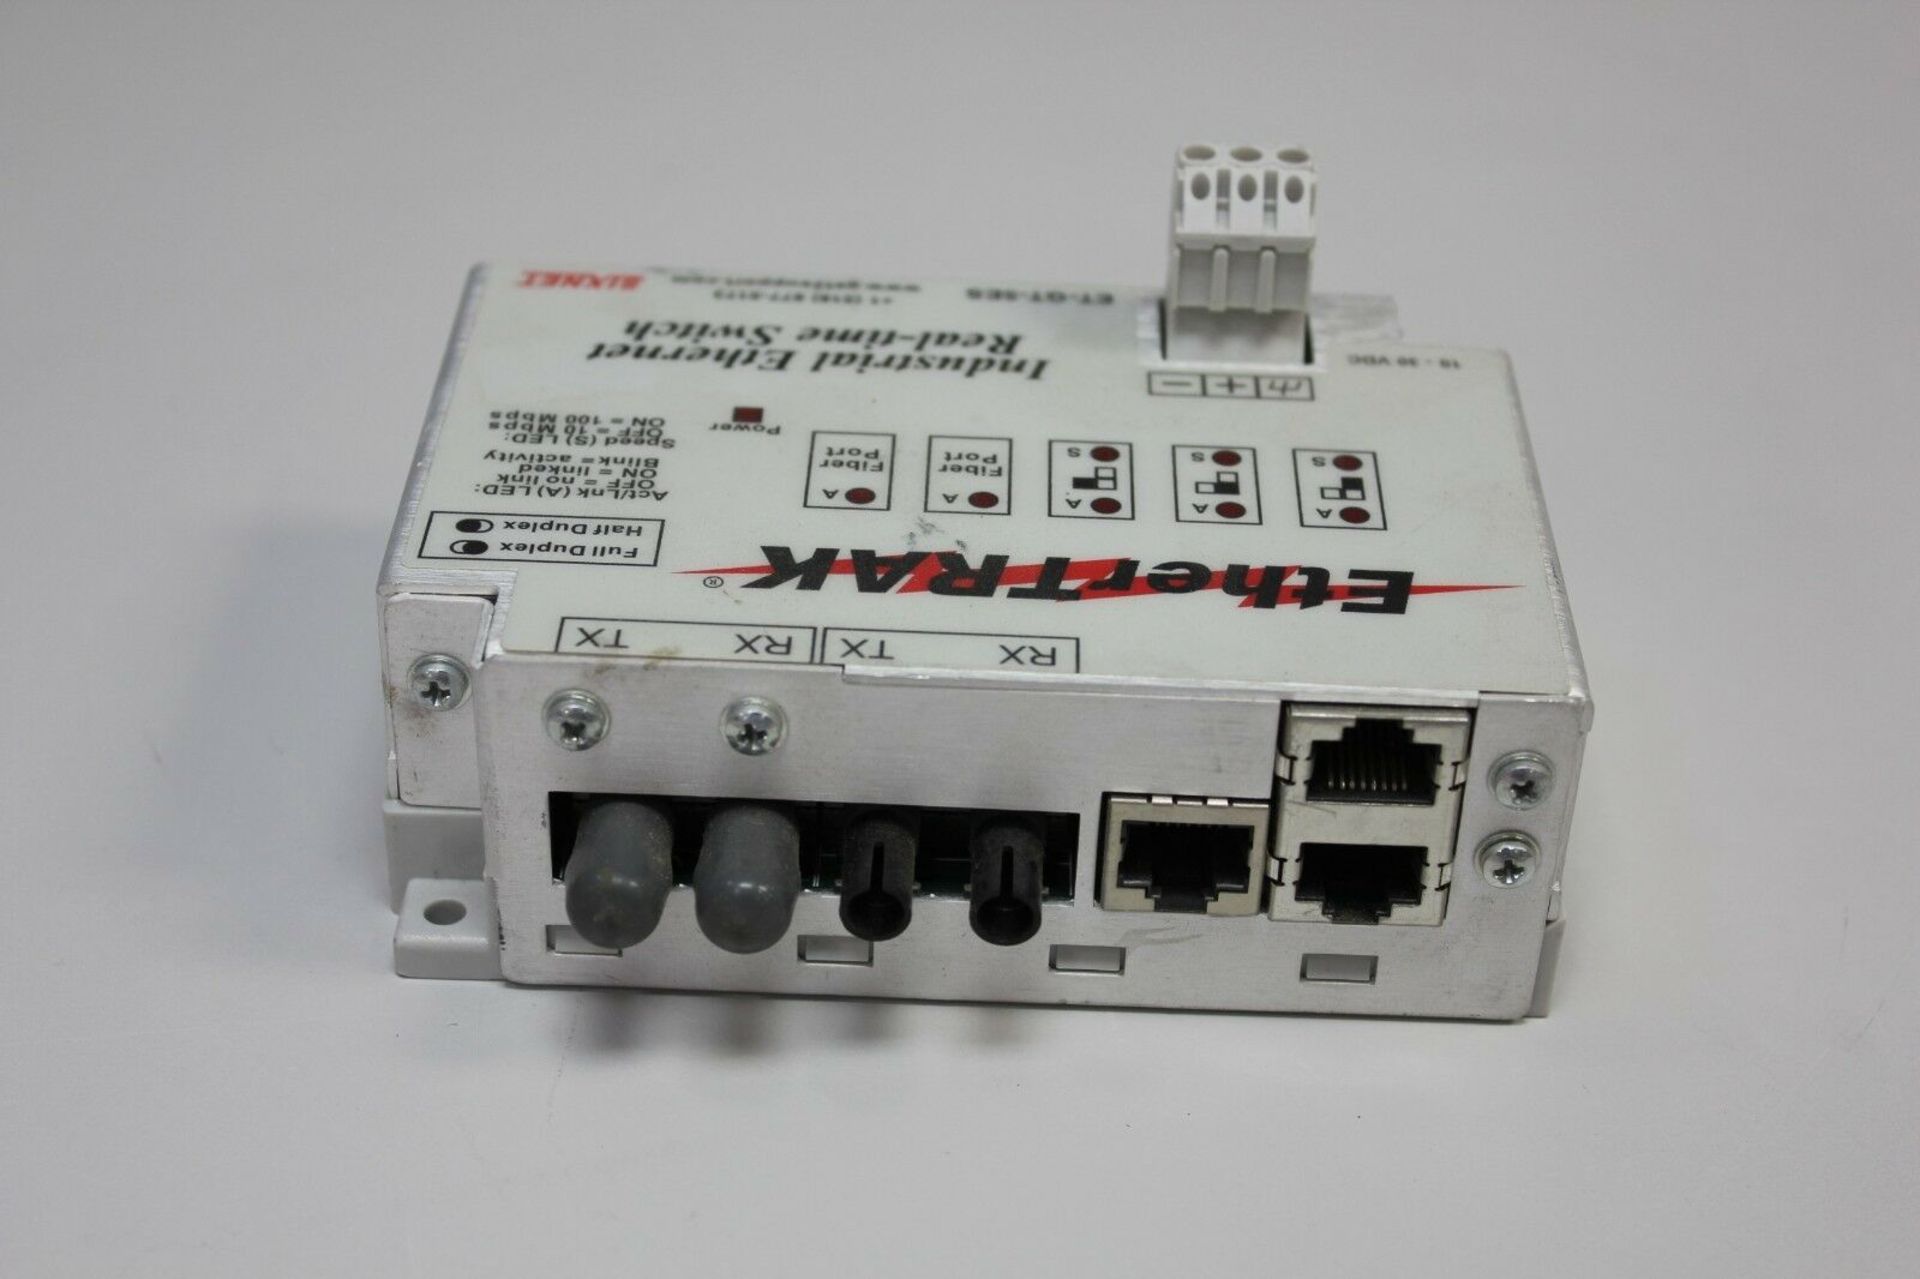 SIXNET ETHERTRAK INDUSTRIAL ETHERNET REAL-TIME SWITCH - Image 2 of 3